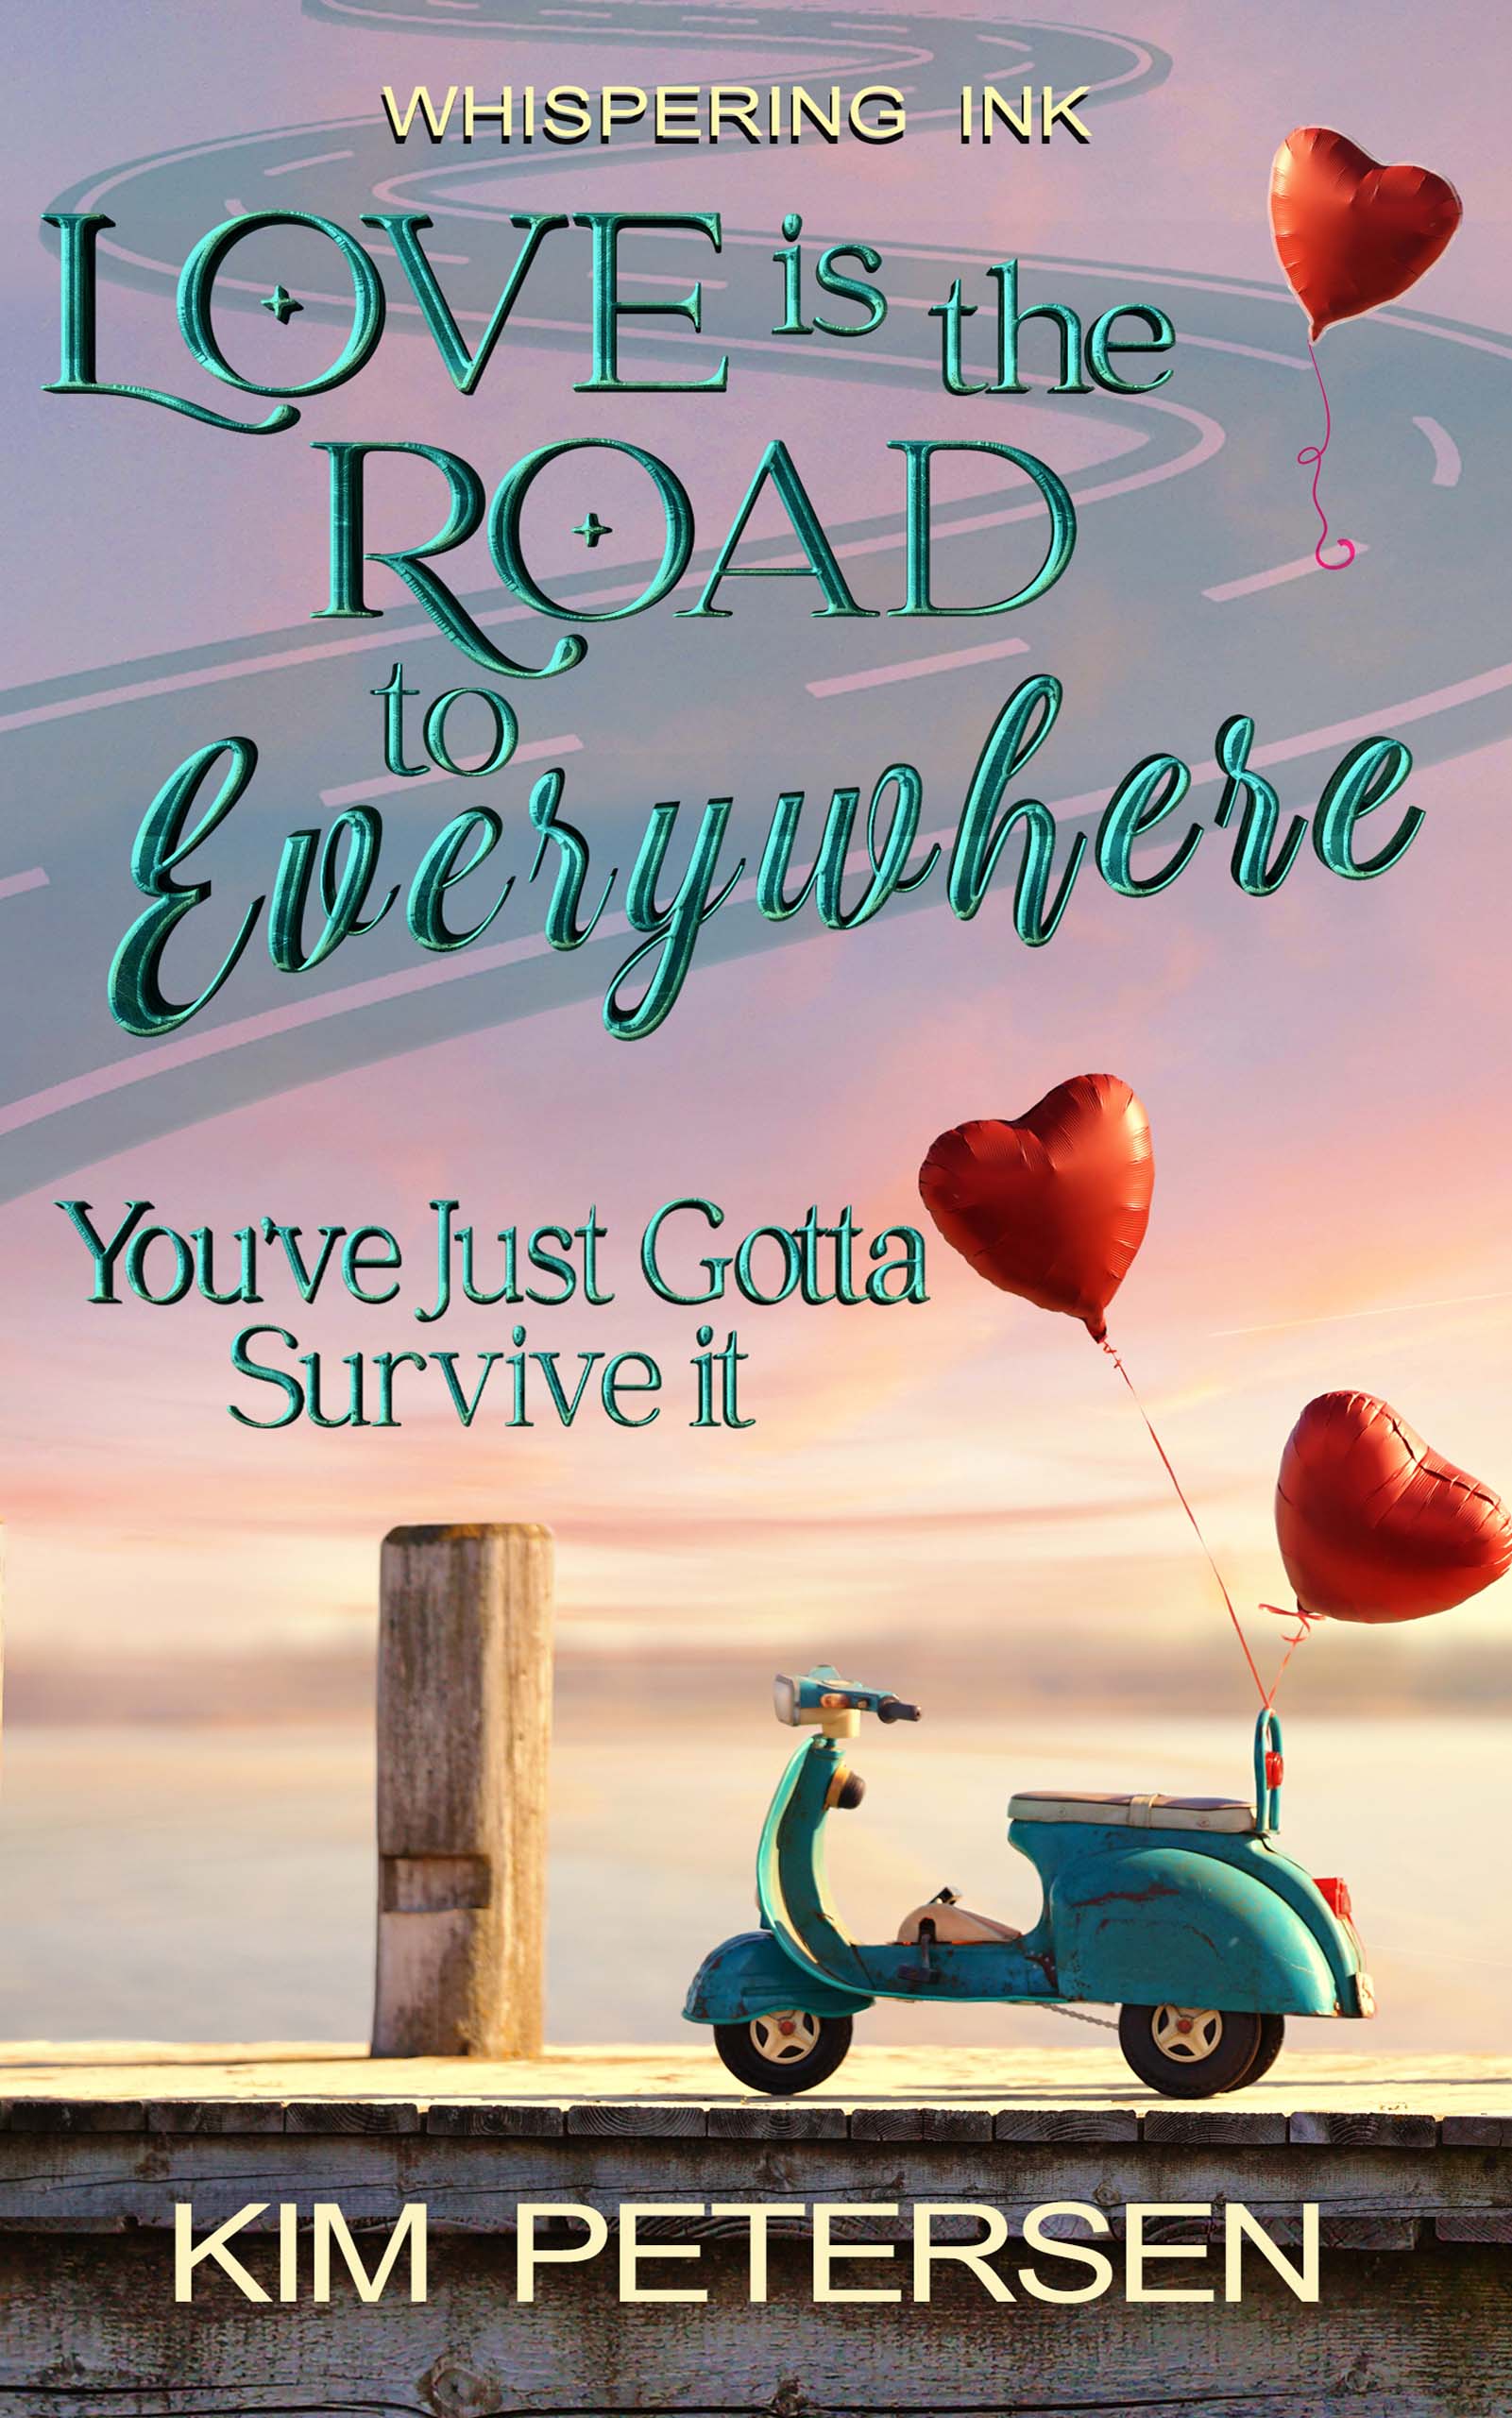 love is the road ebook cover sml